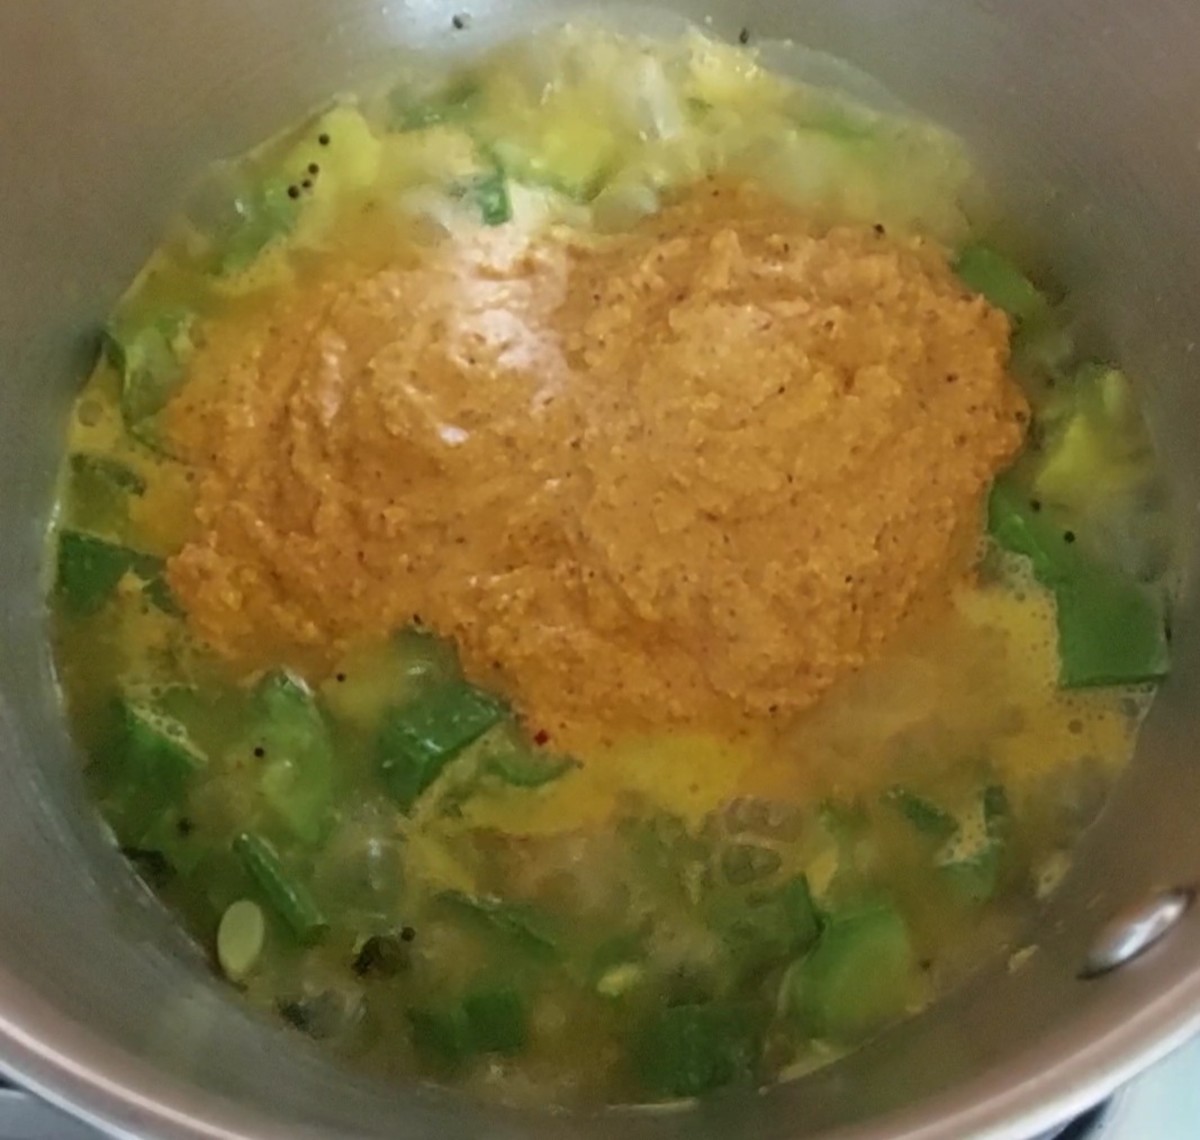 Add the ground paste to the well-cooked vegetable mixture.